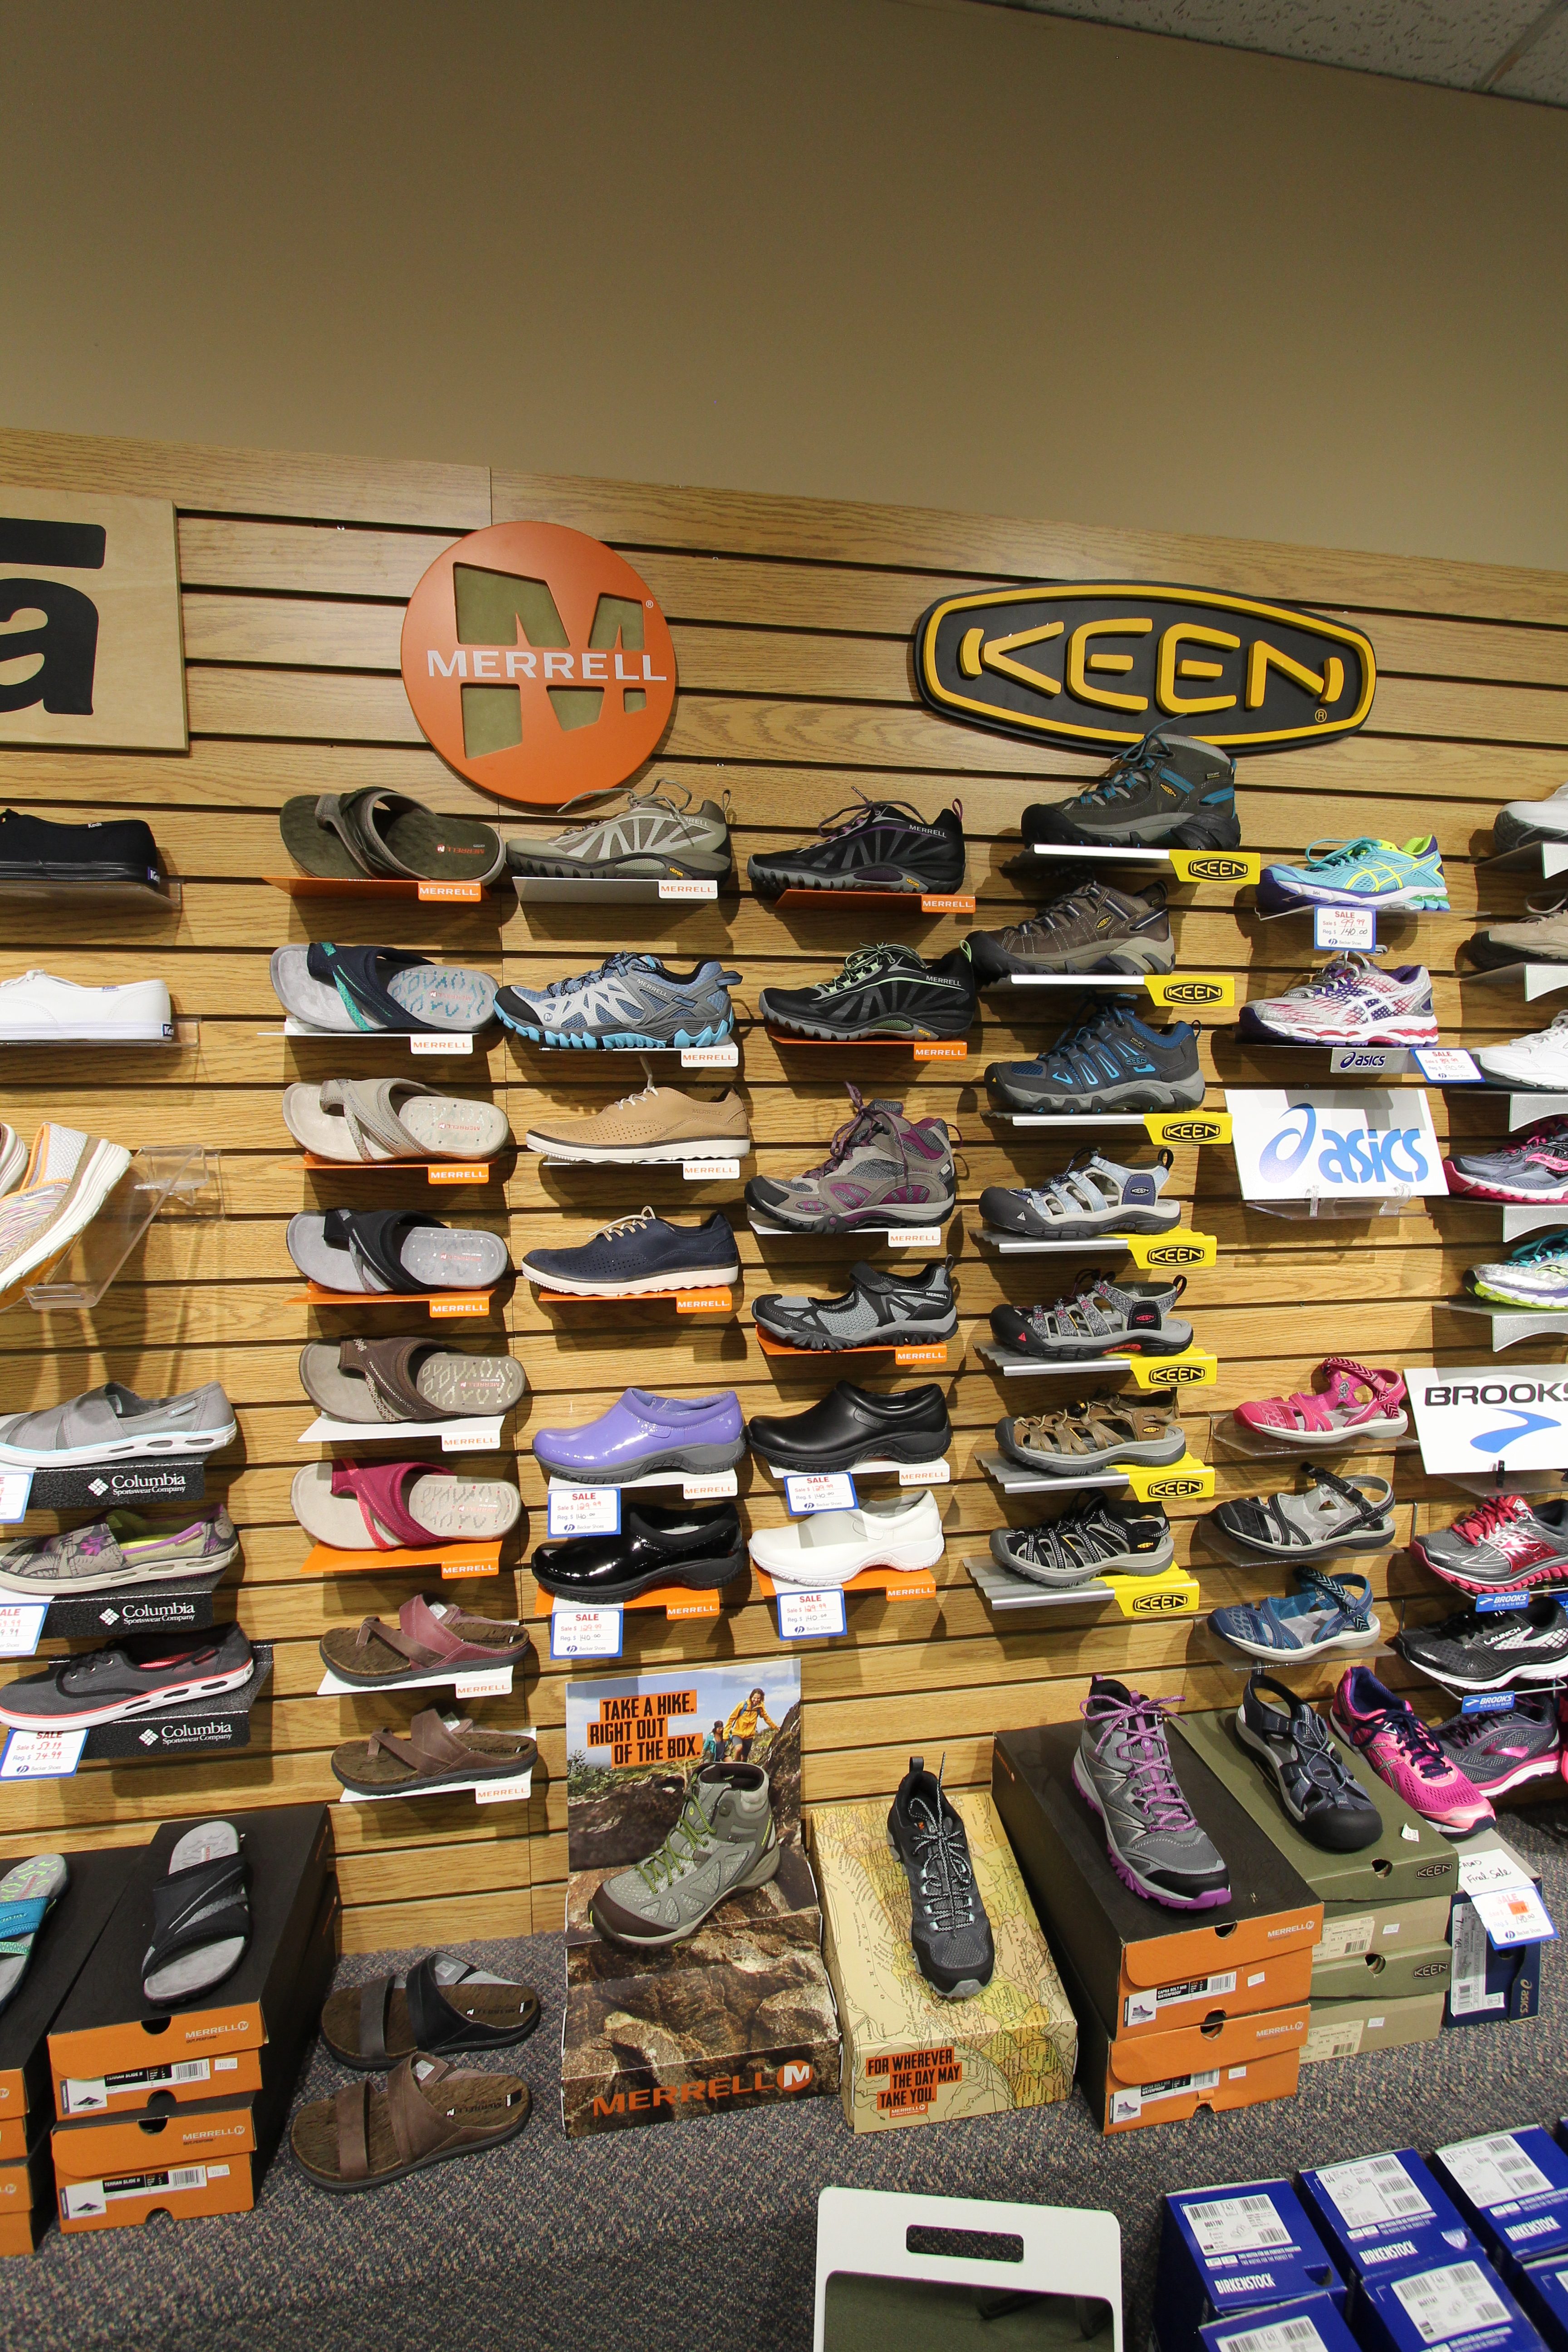 Keen and Merrell